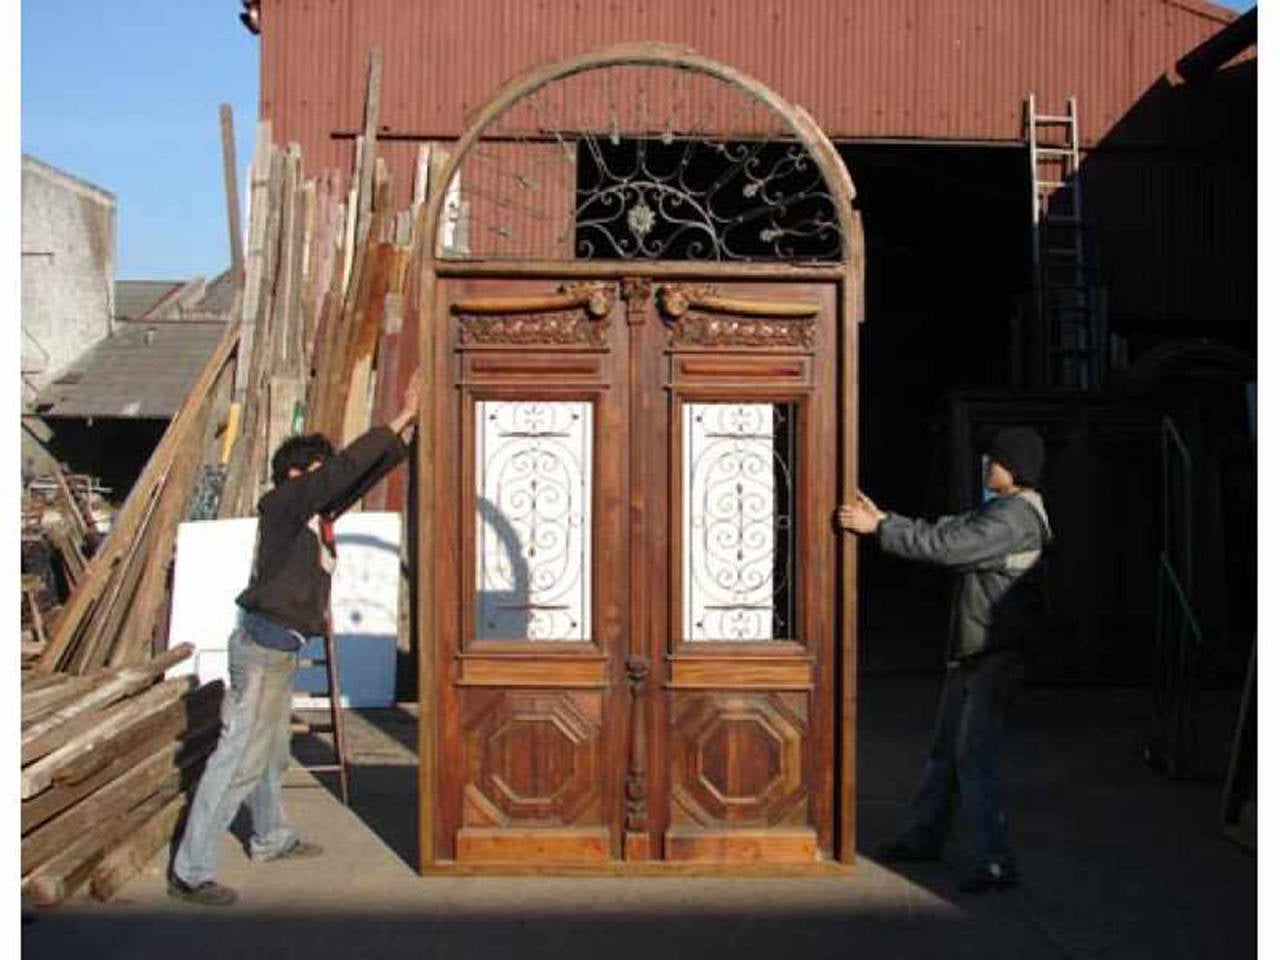 Amazing arched top double front door. It has amazing high relief details made by hand at the top. Also has stunning wrought iron inserts at the transom and door with hexagonal panels at the bottom.

DETAILS:

Overall Dimension:67 3/4